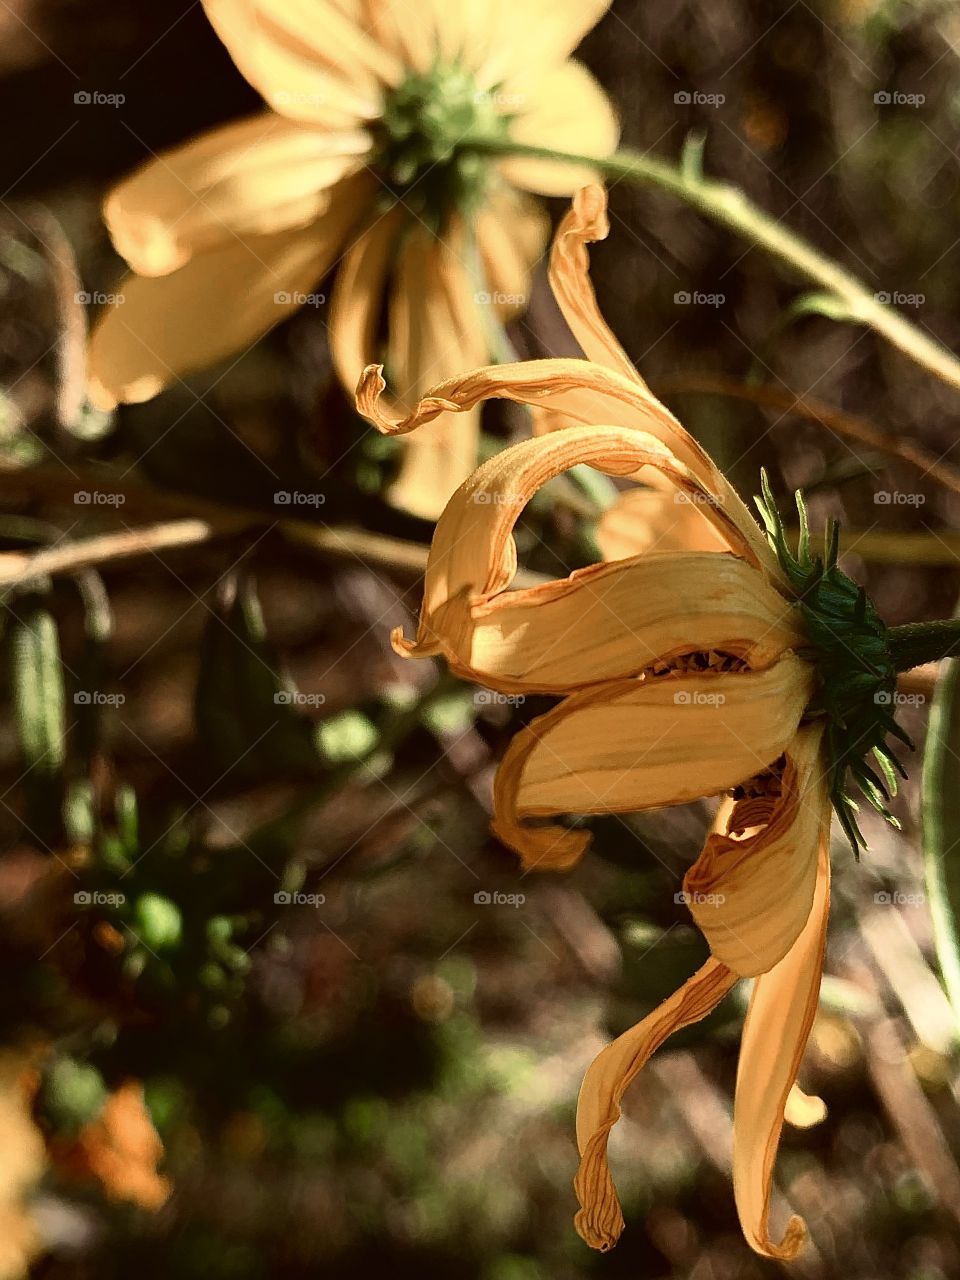 Closeup of a dying yellow daisy among others that are fresh and full with leaves and greenery in the background.